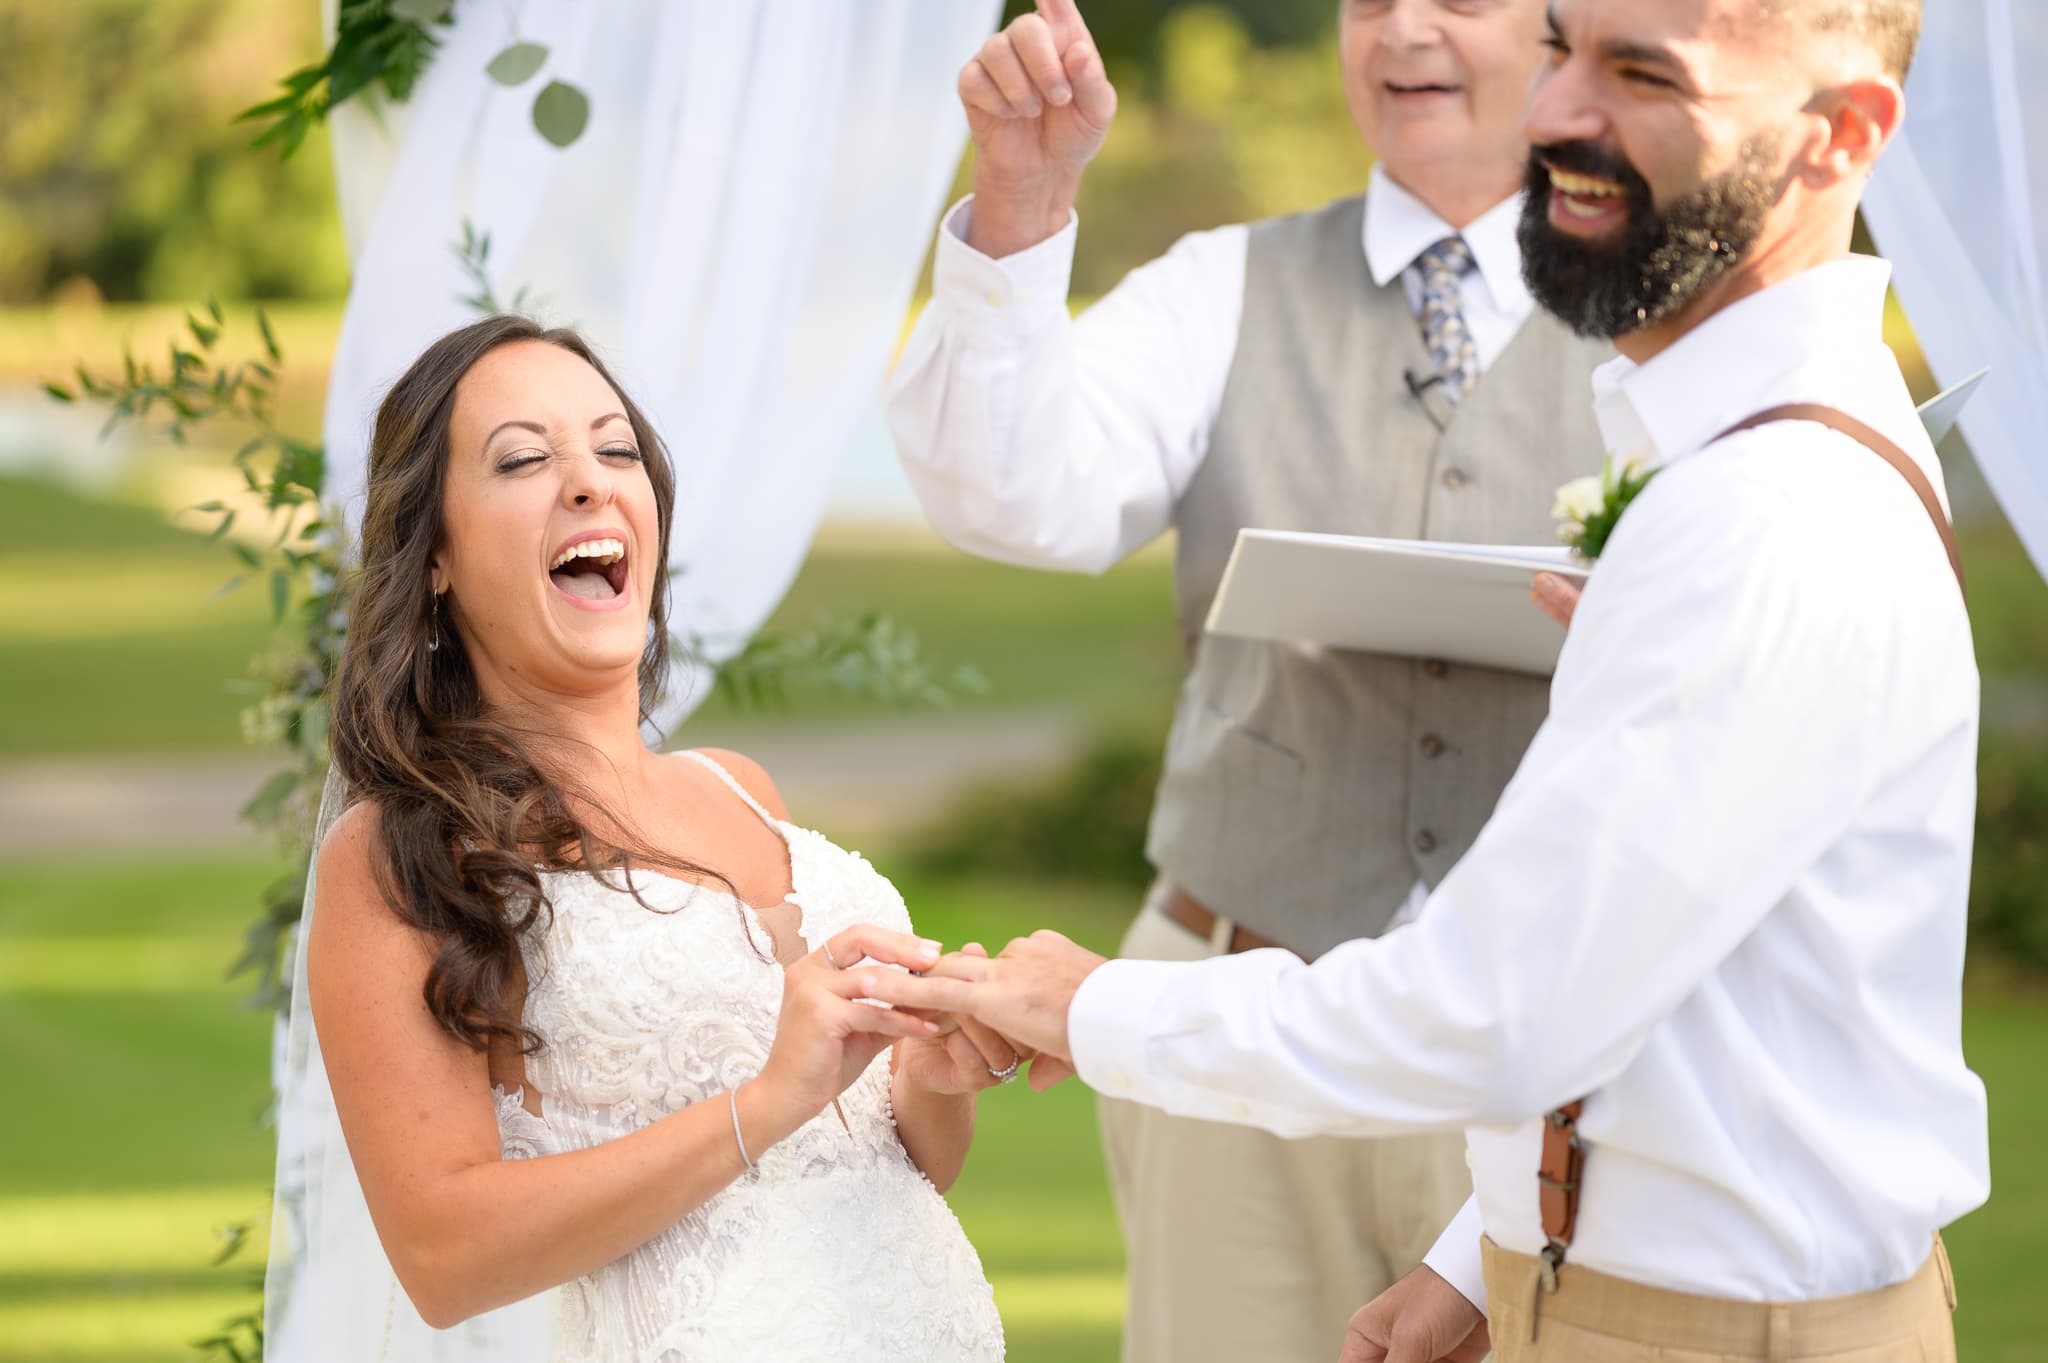 Laughing during the ceremony - Pawleys Plantation